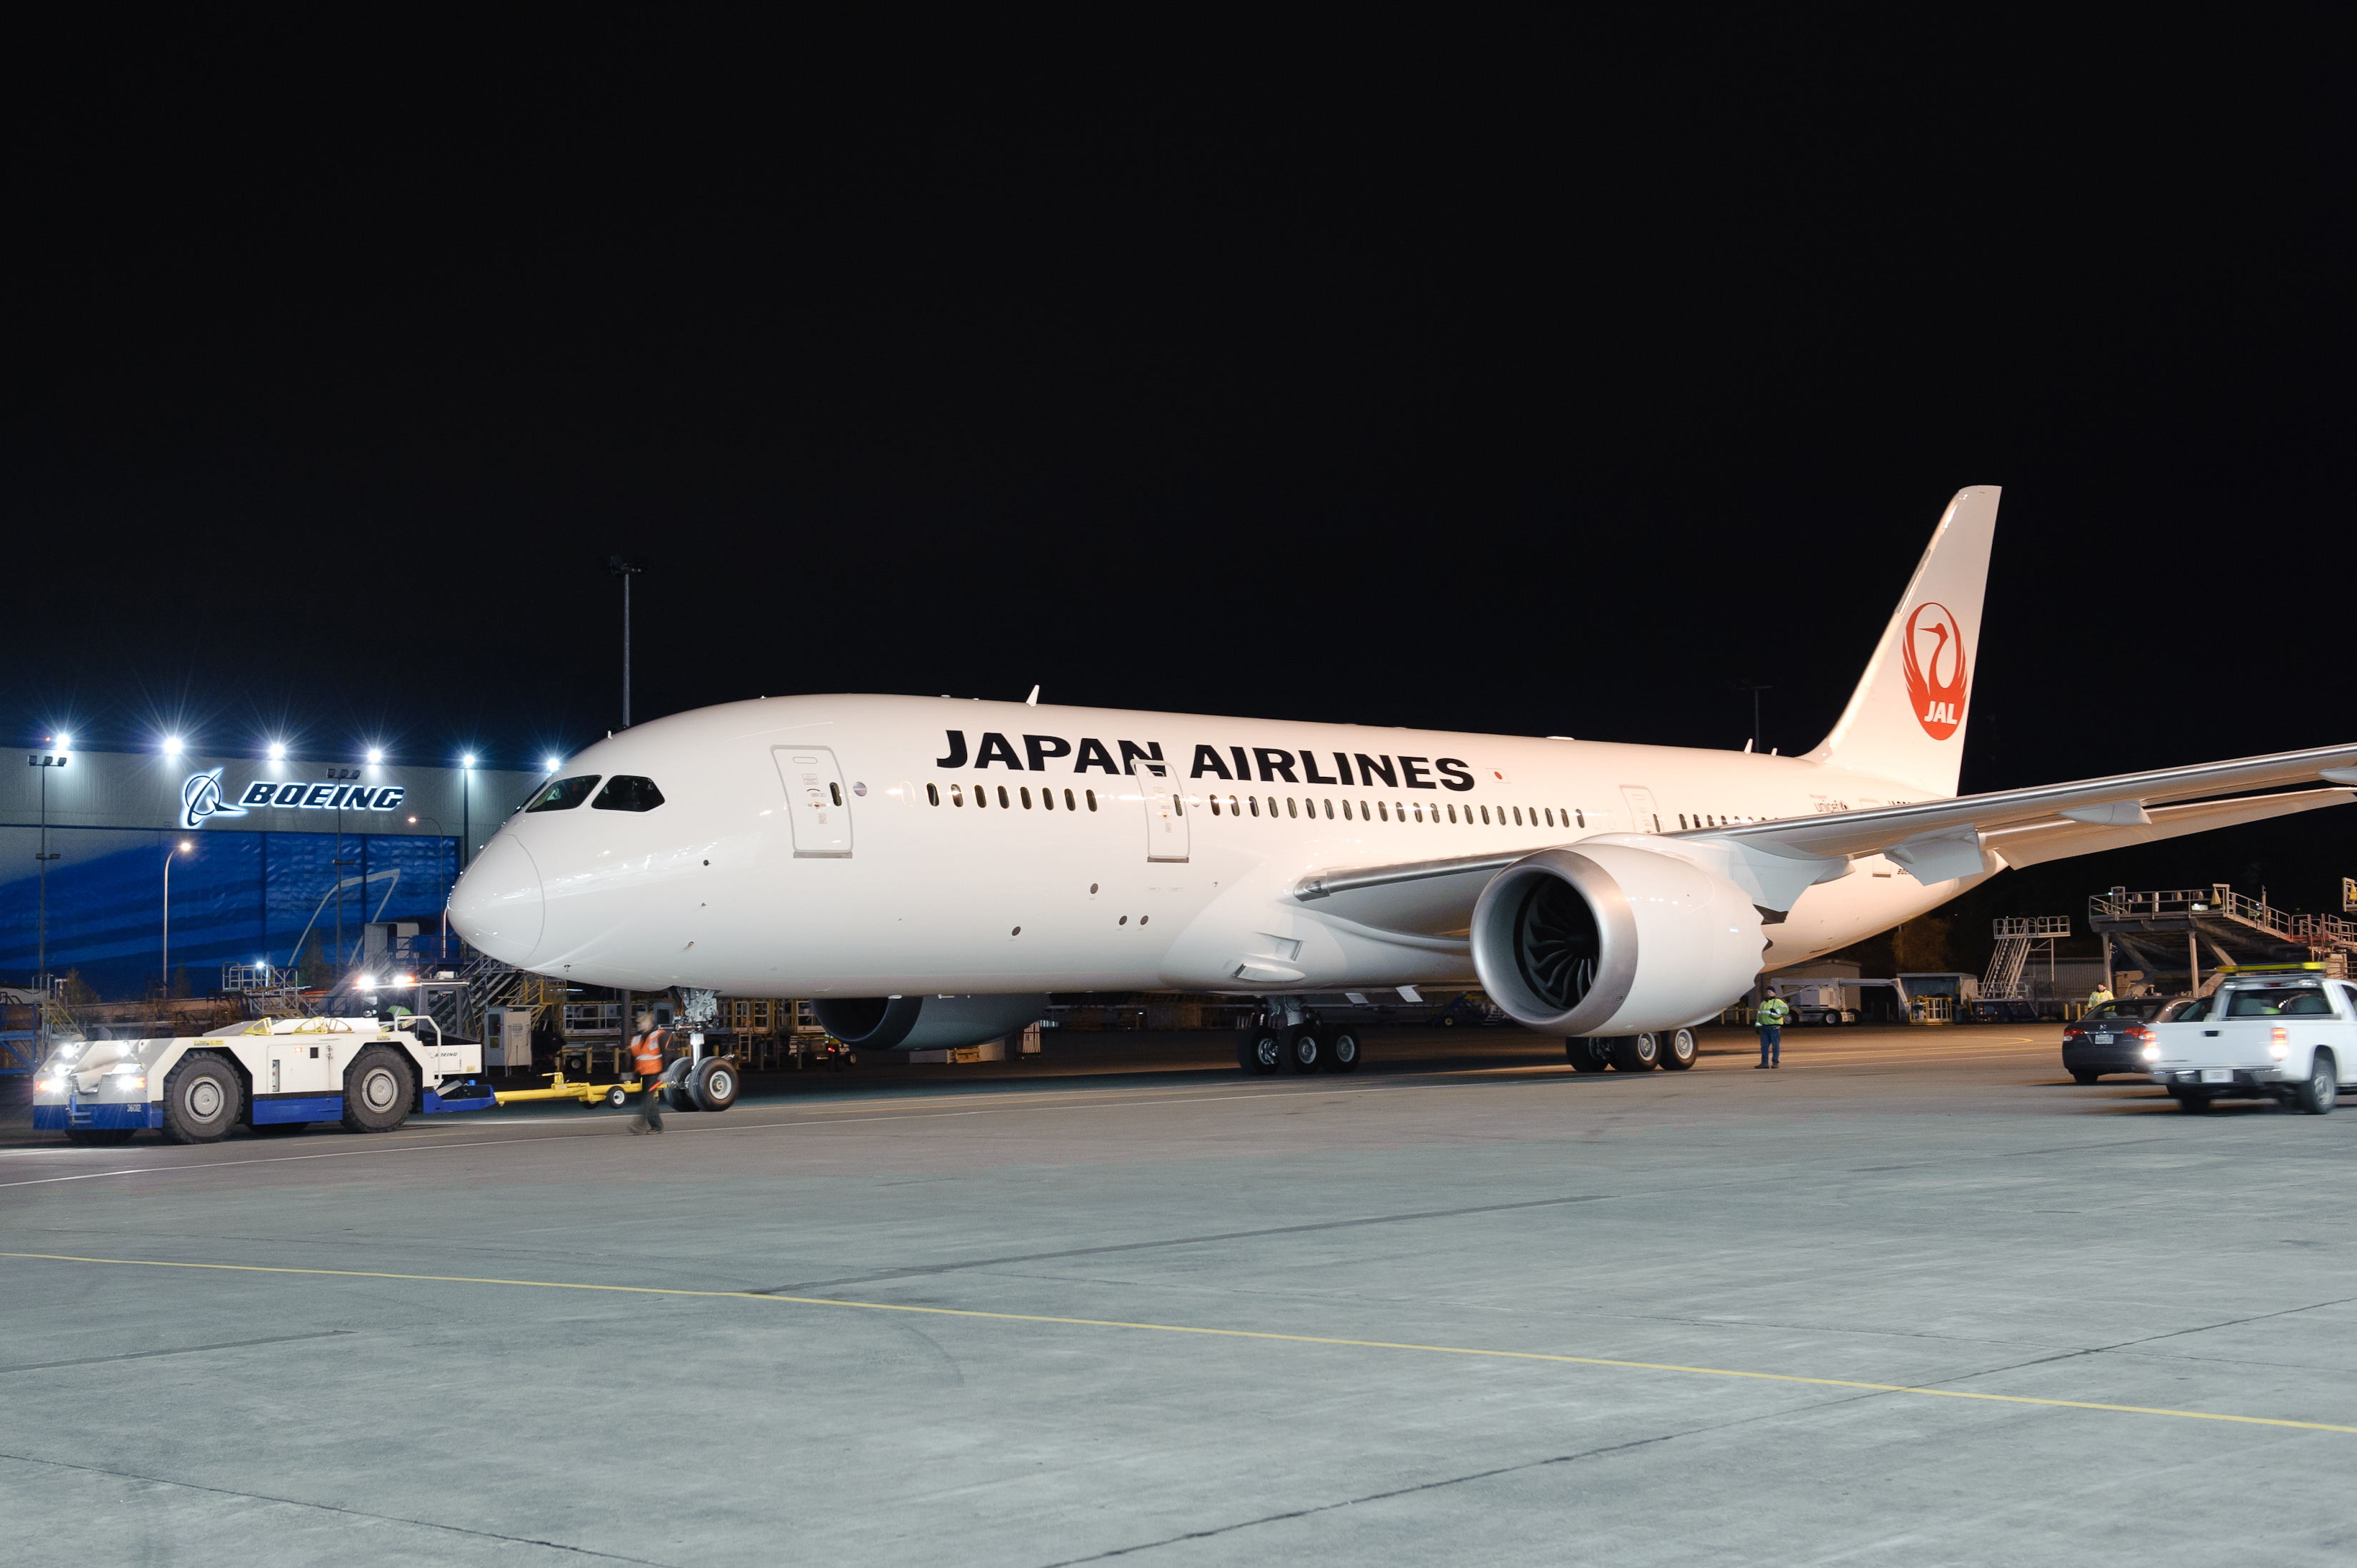 Japan Airlines 787